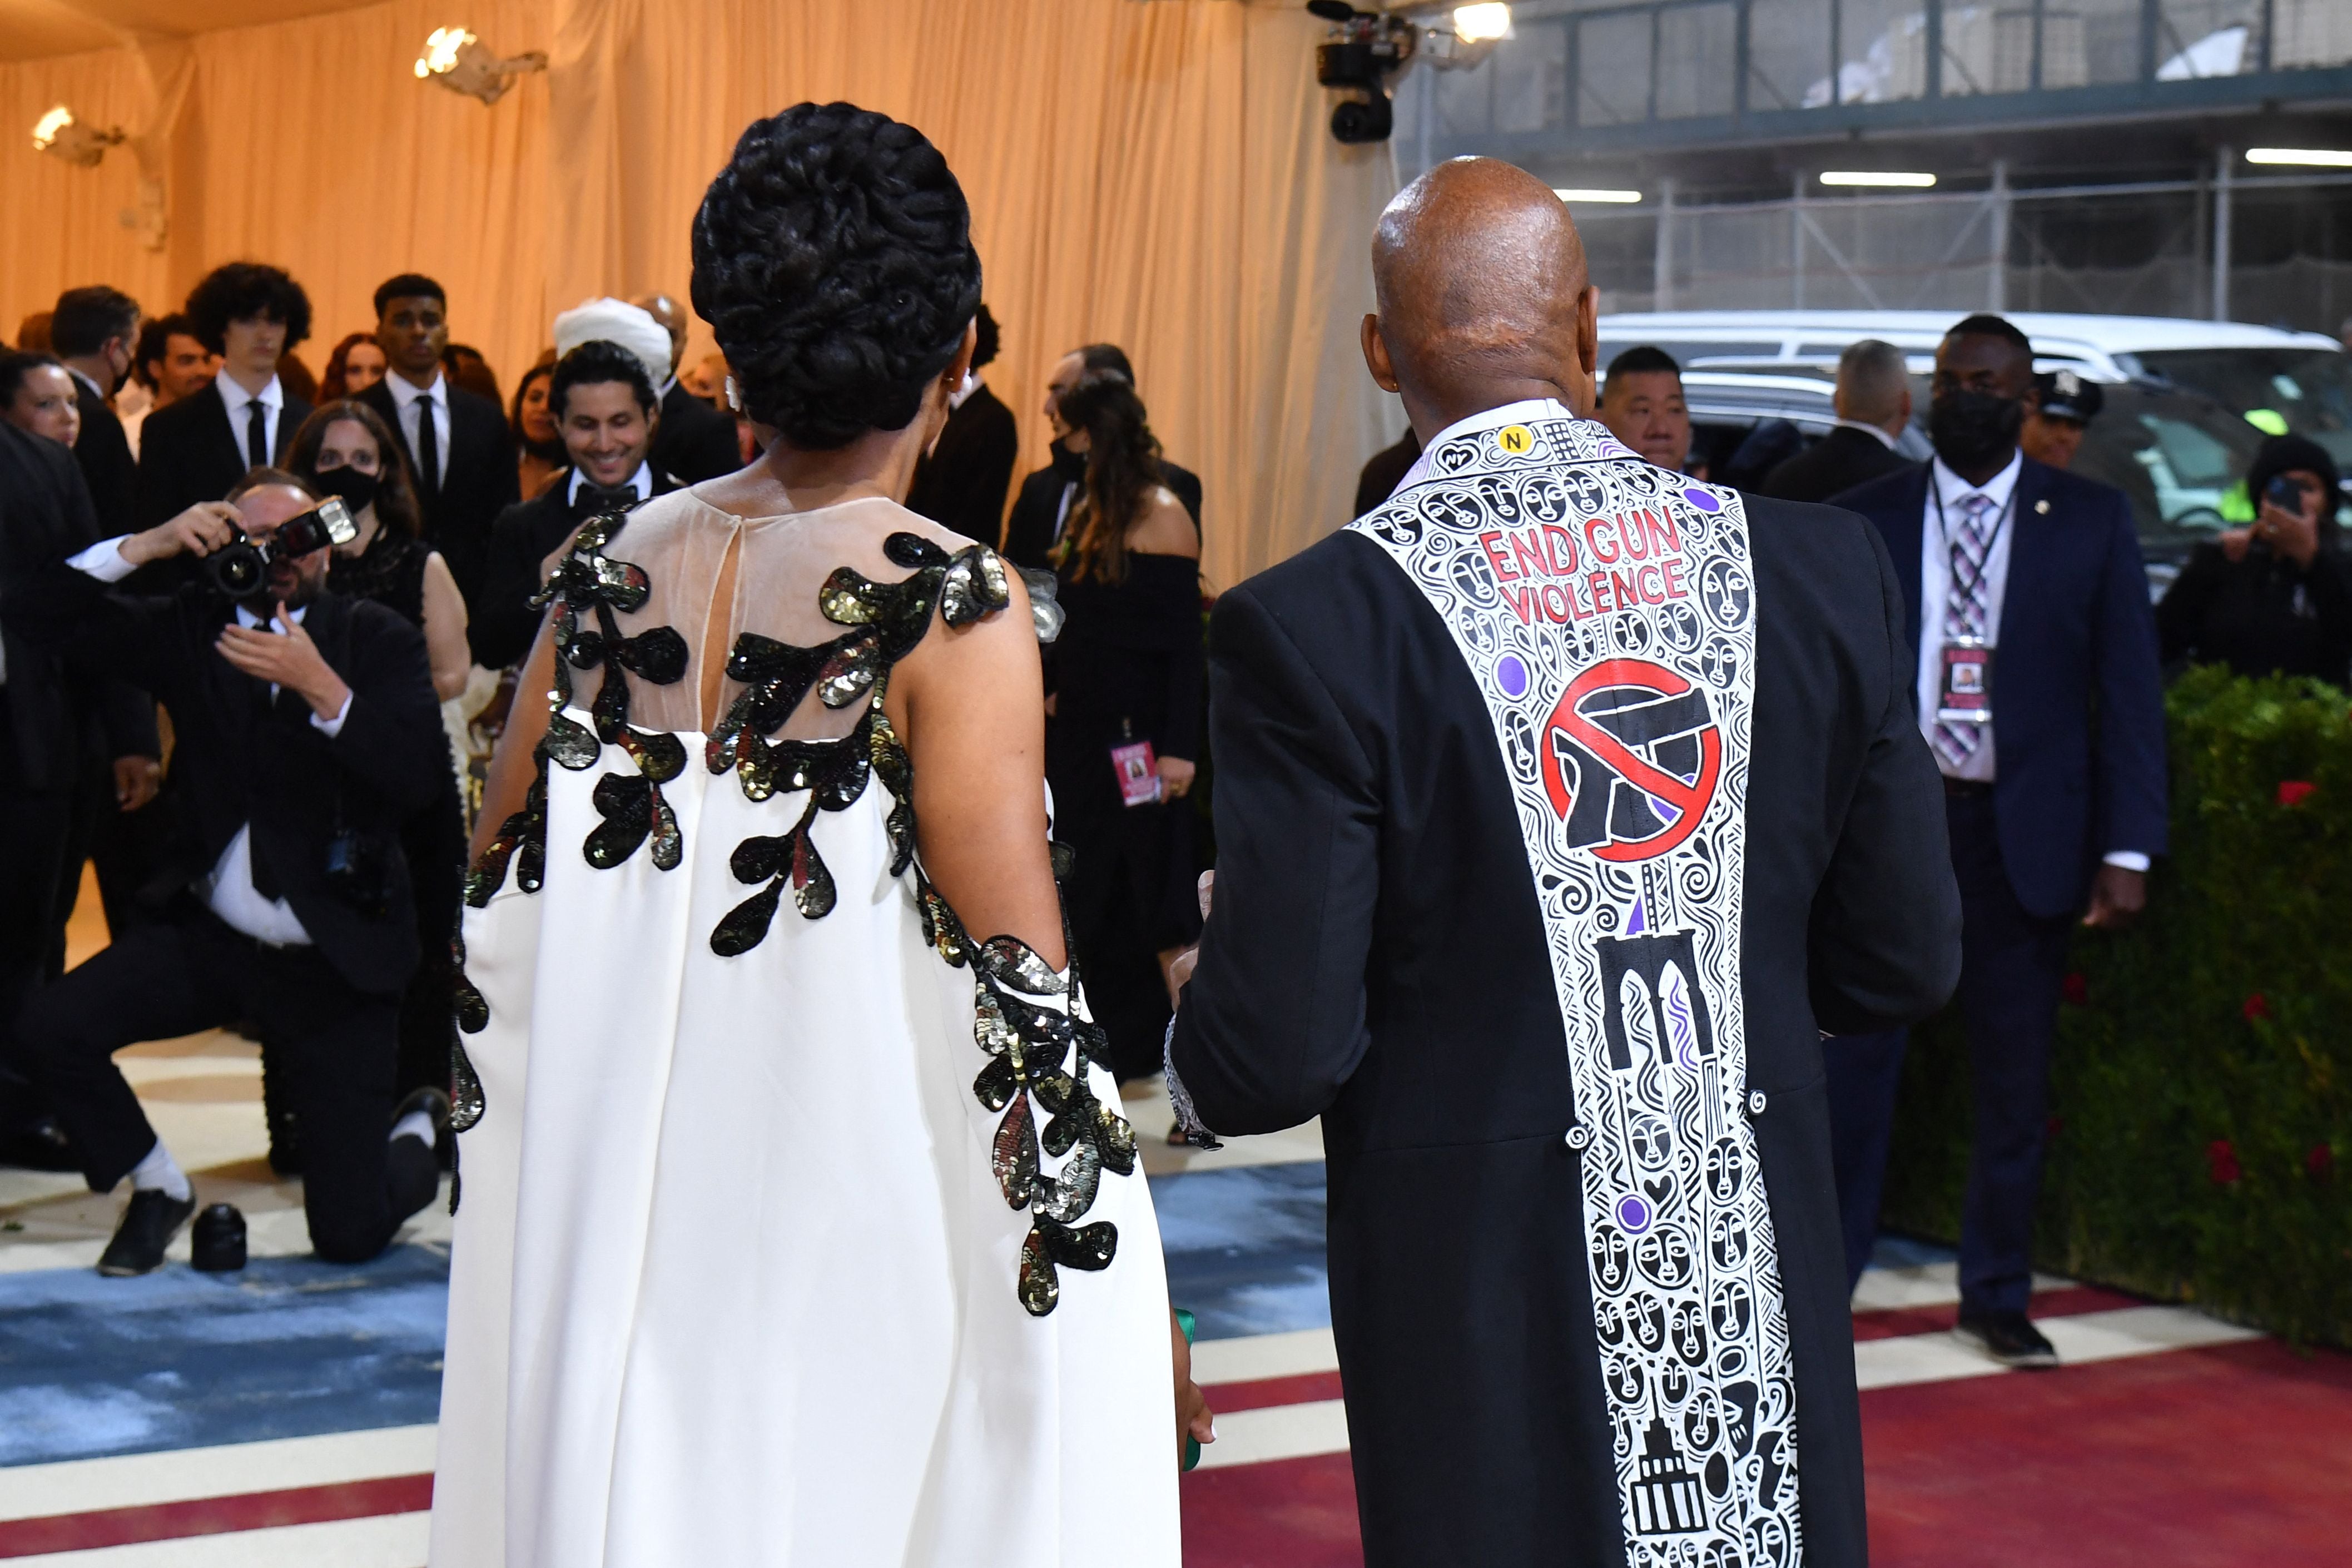 New York City Mayor Eric Adams, wearing a jacket with "End Gun Violence", and partner Tracey Collins arrive for the 2022 Met Gala at the Metropolitan Museum of Art on May 2, 2022, in New York.